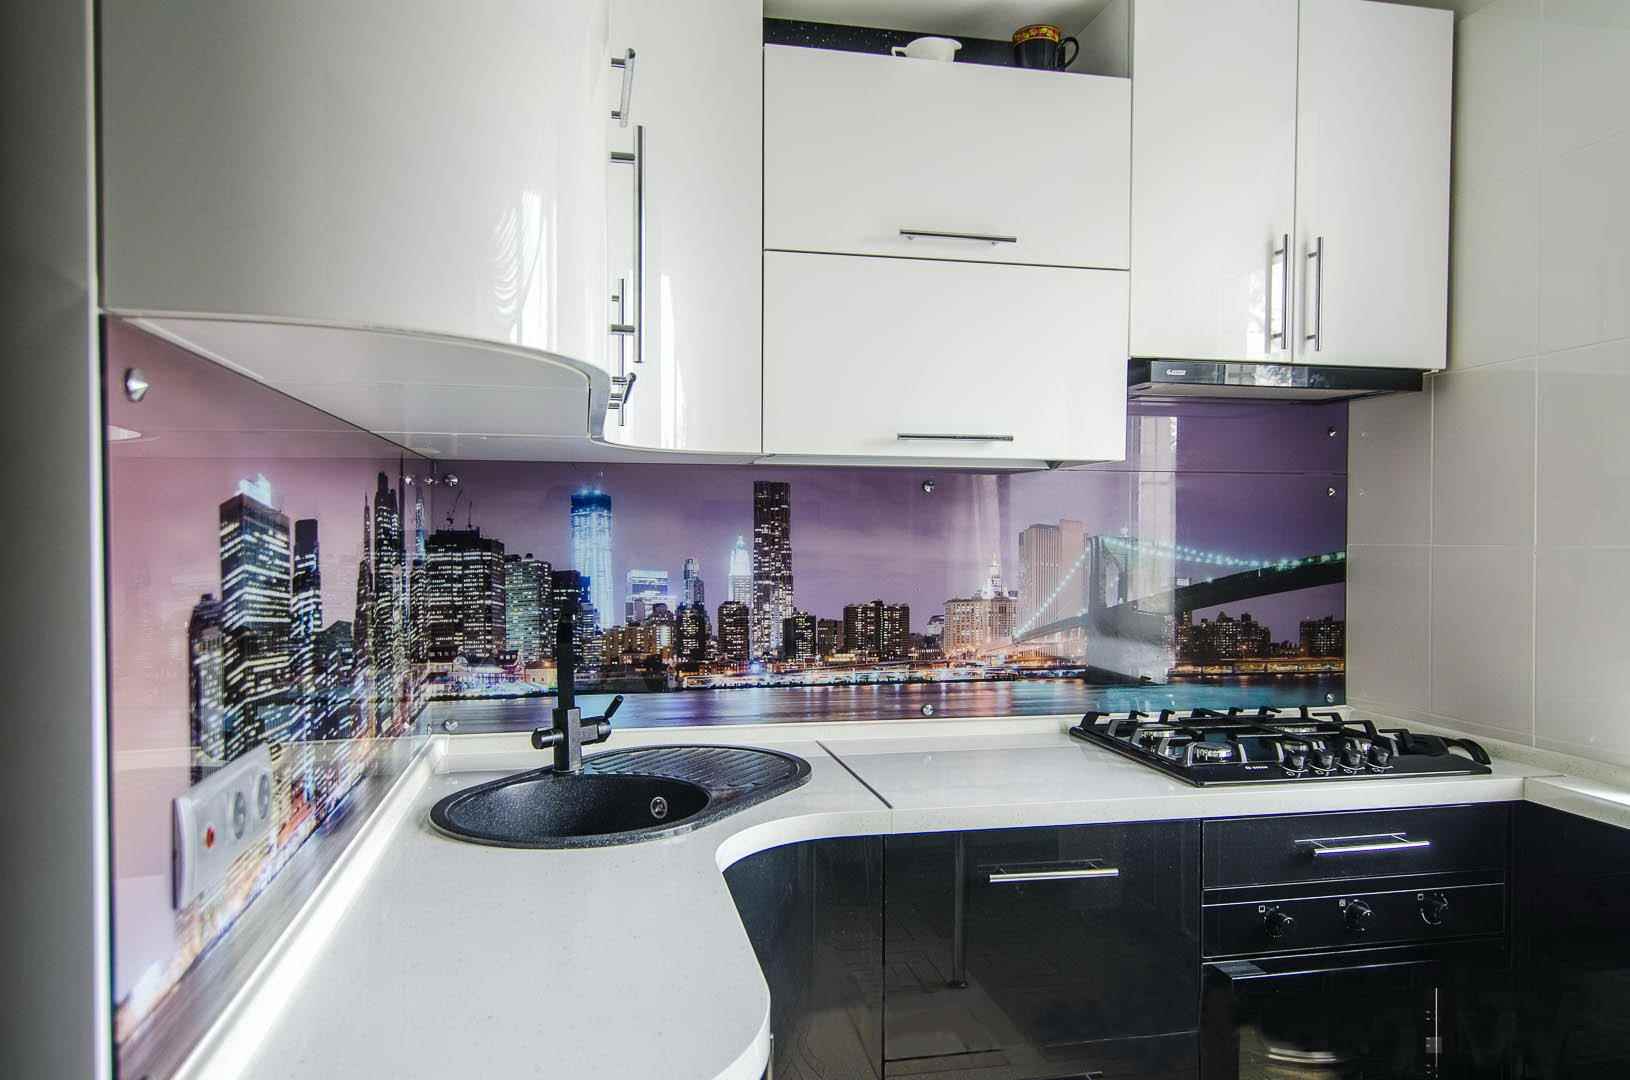 an example of an unusual style of kitchen 7 sq.m